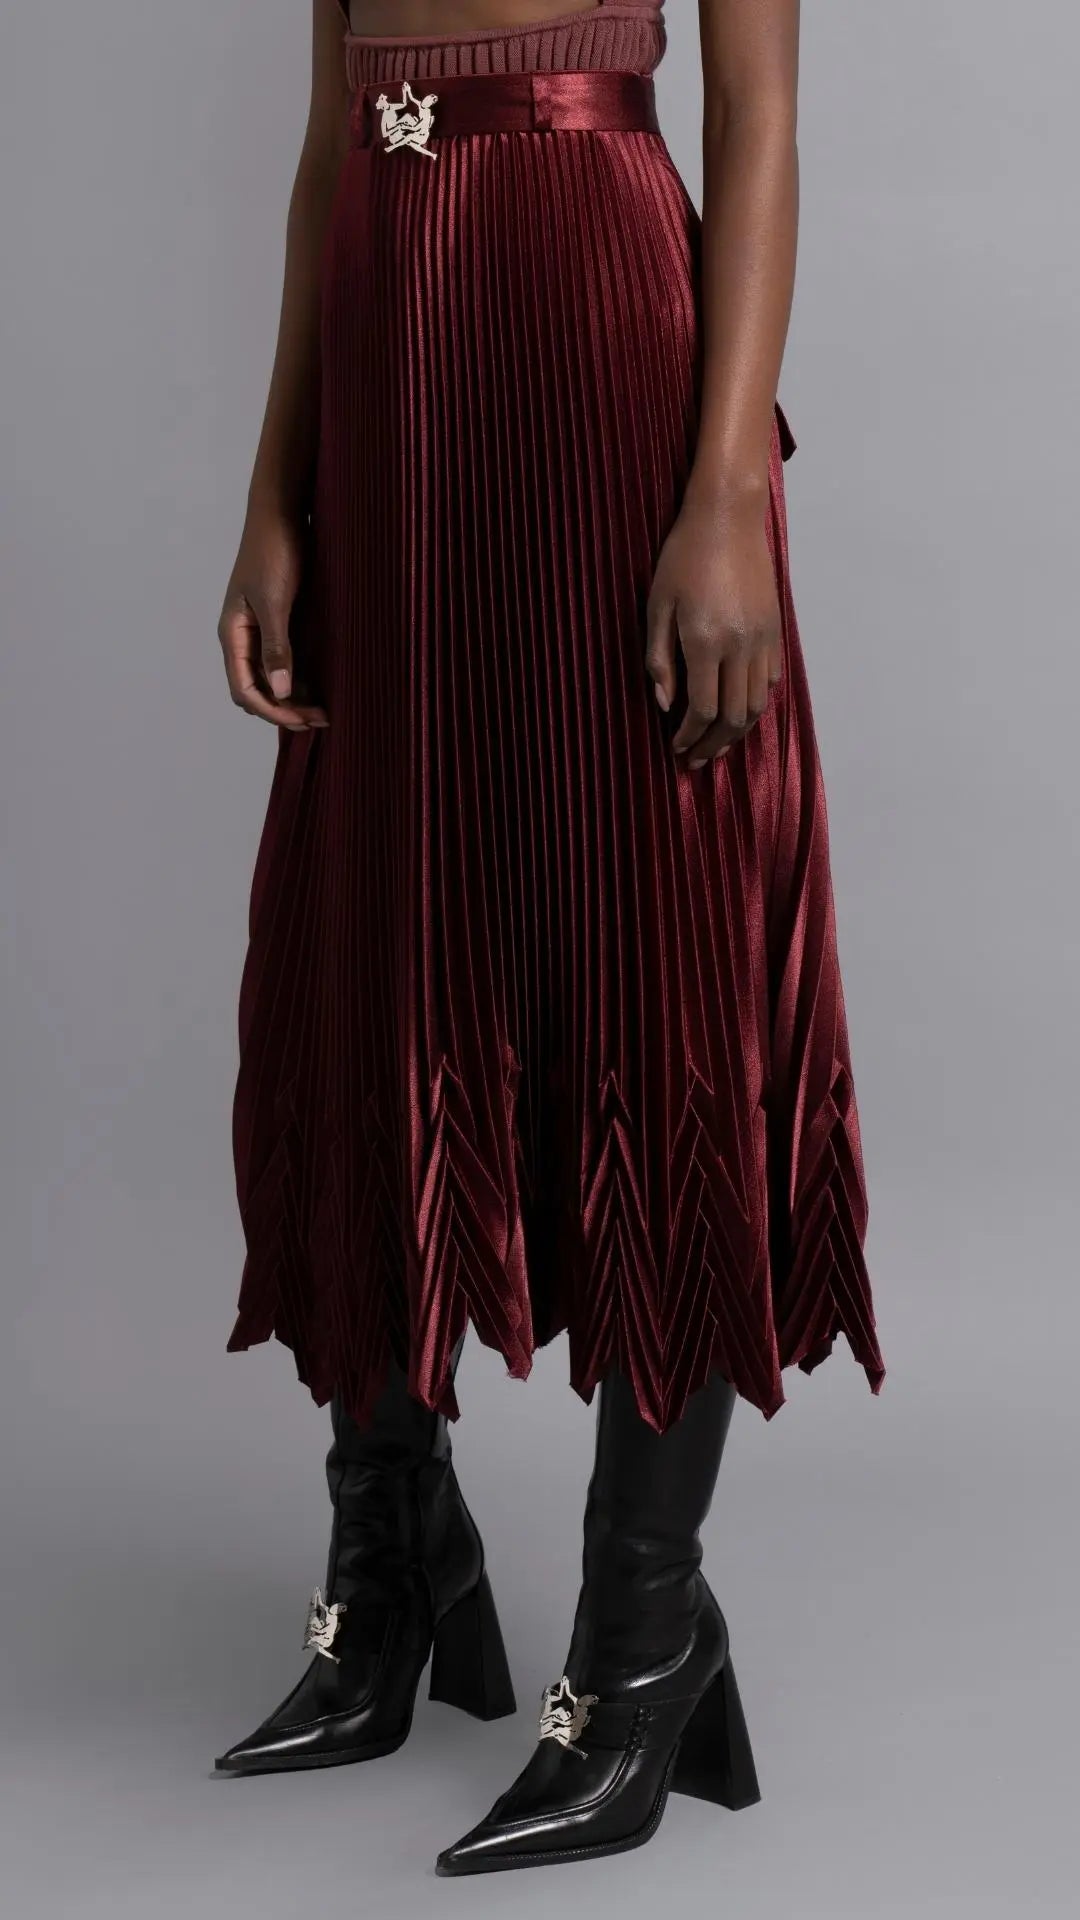 Thebe Magugu Chevron Pleated Skirt in a rich burgundy color. Fitted at the waist with straight pleats it falls into a double chevron pleat bottom. Long in length. It comes with a tie belt. Shown on model facing to the sise.